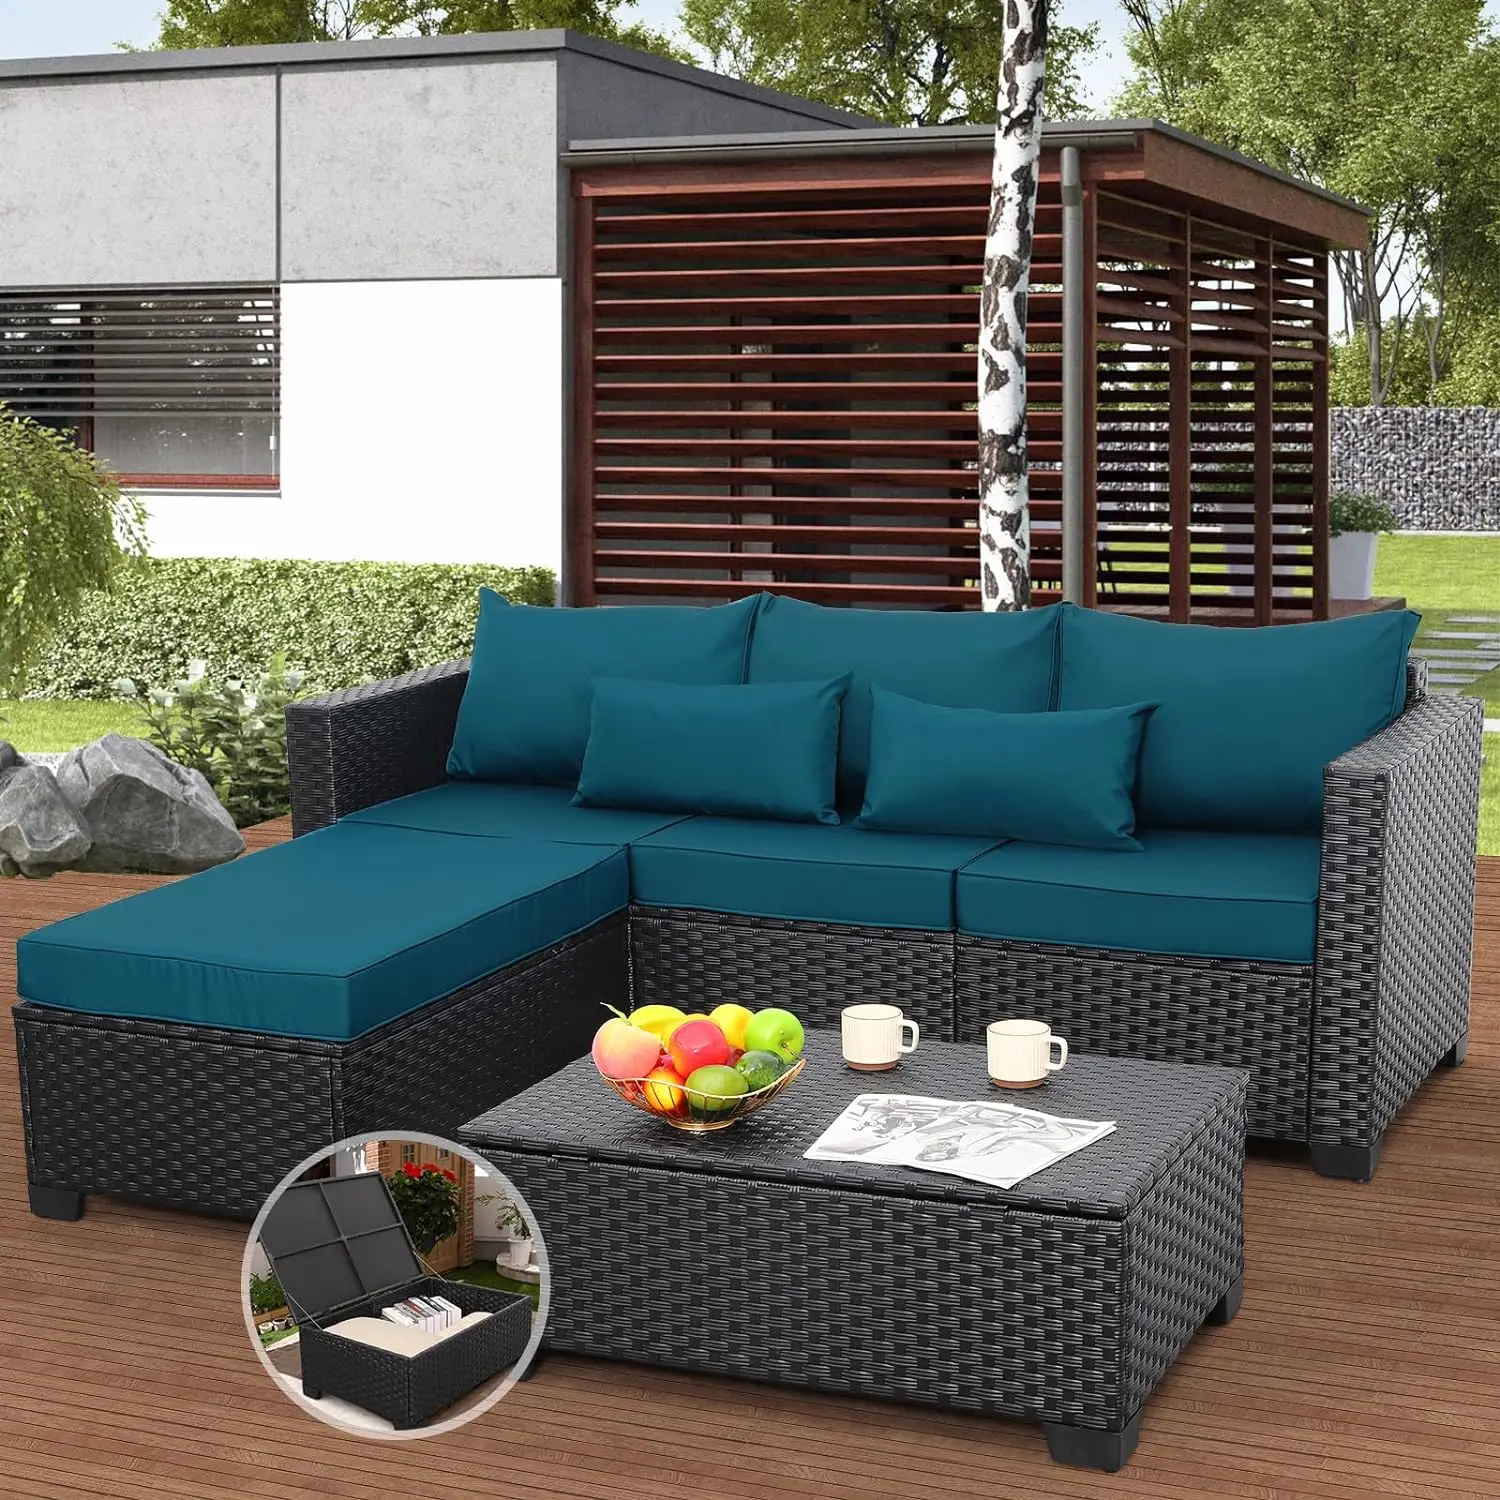 

3 Pieces Patio Furniture Set Outdoor Sectional Wicker Patio Furniture Patio Couch with Ottoman and Outdoor Storage Table